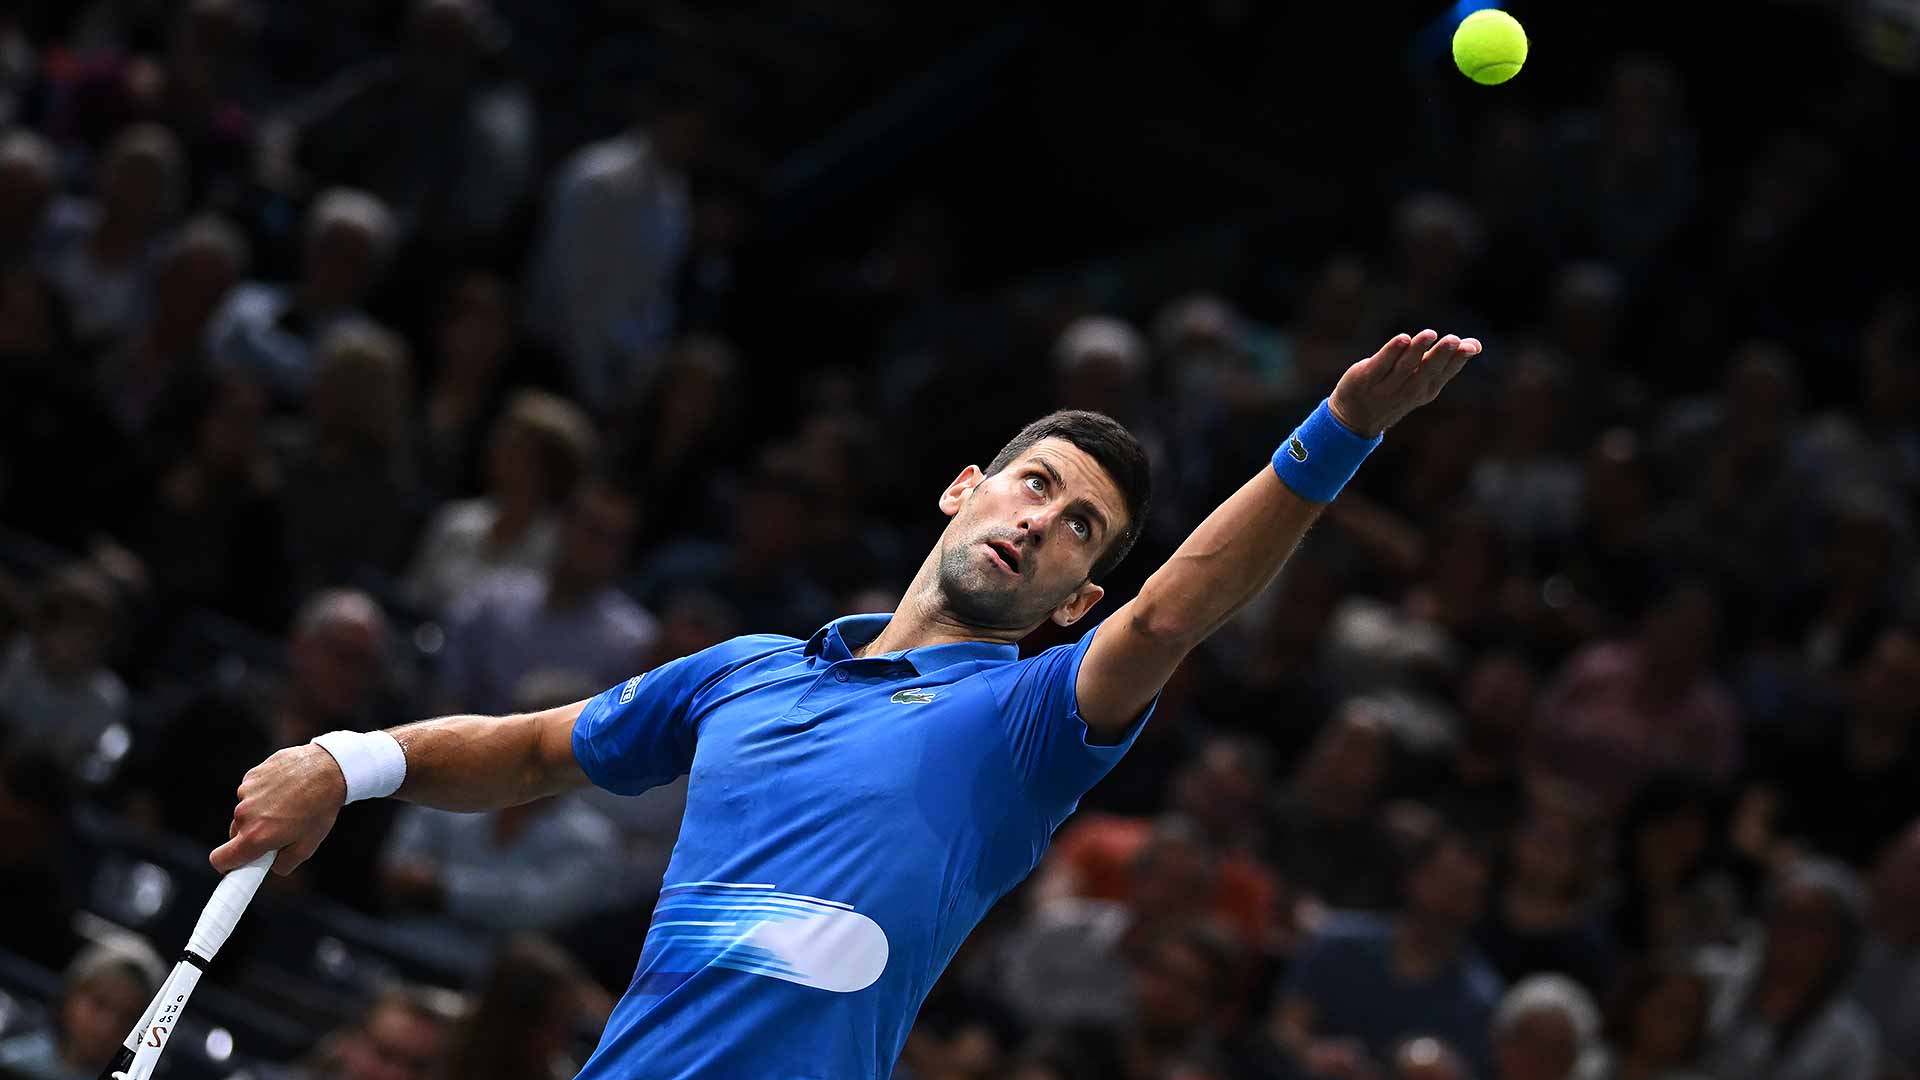 Novak Djokovic has been rewarded for serving to the forehand.